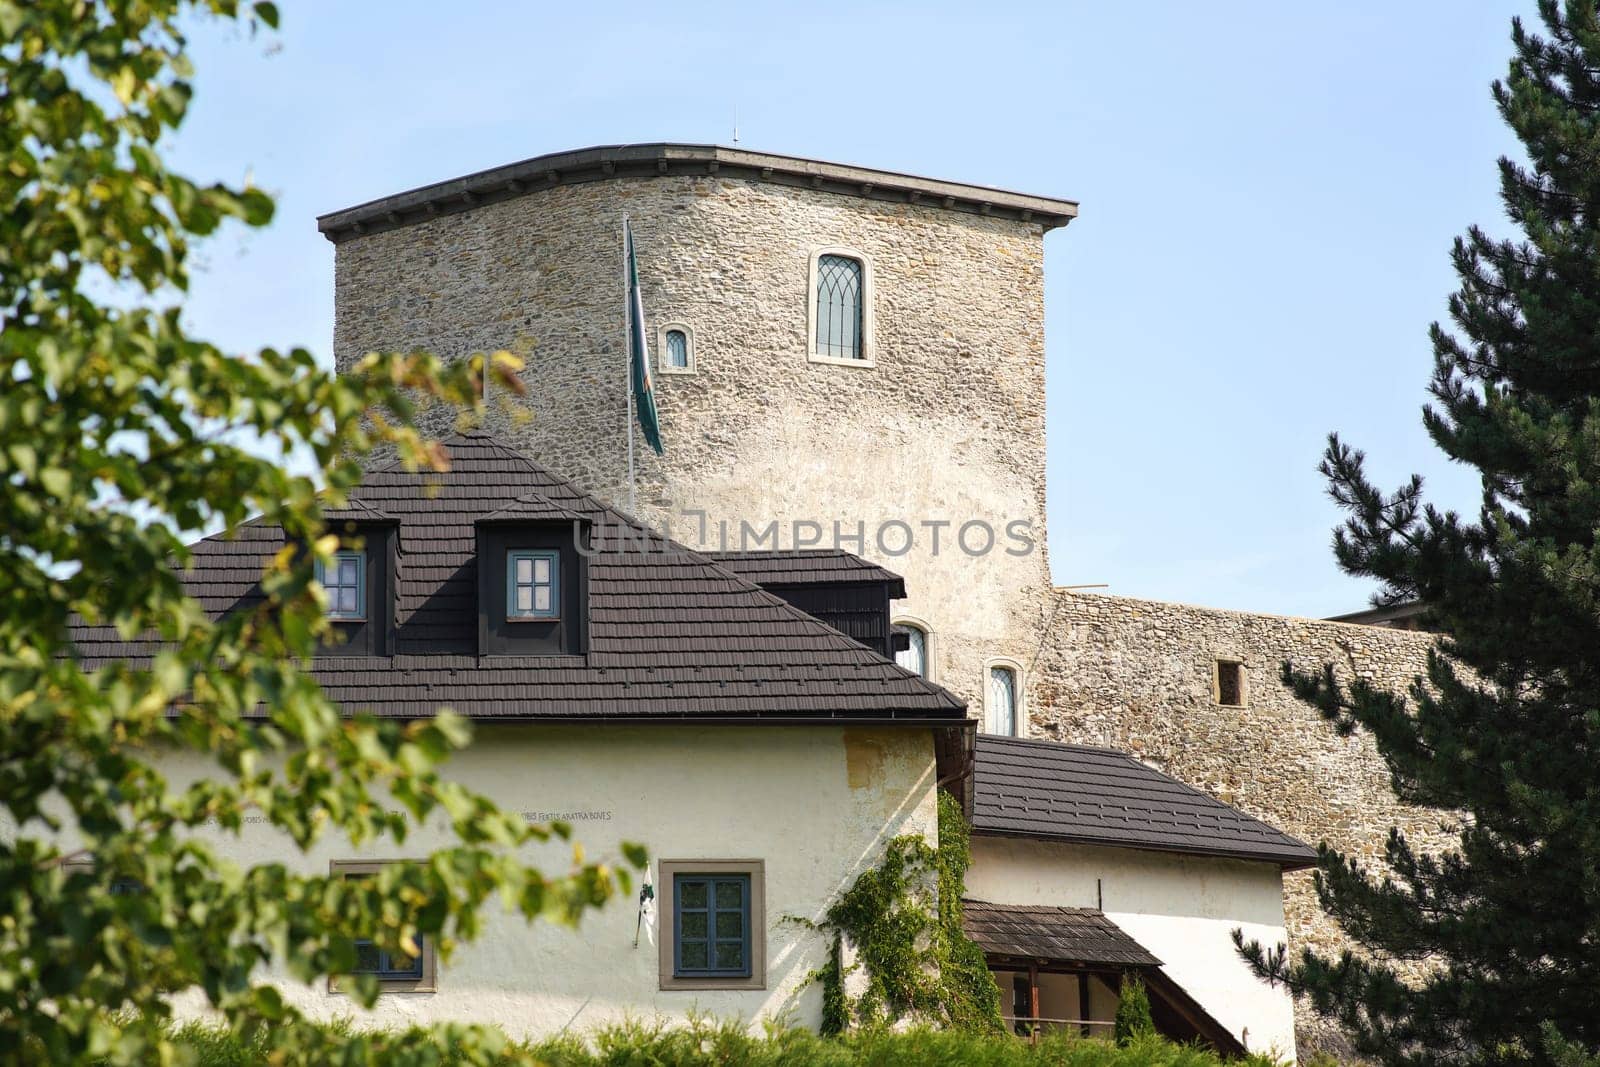 Liptovsky Hradok, Slovakia - May 27, 2018: Castle "Novy hrad" (first written record to "Wywar" fort dated 1341), view from front blurred trees in foreground by Ivanko